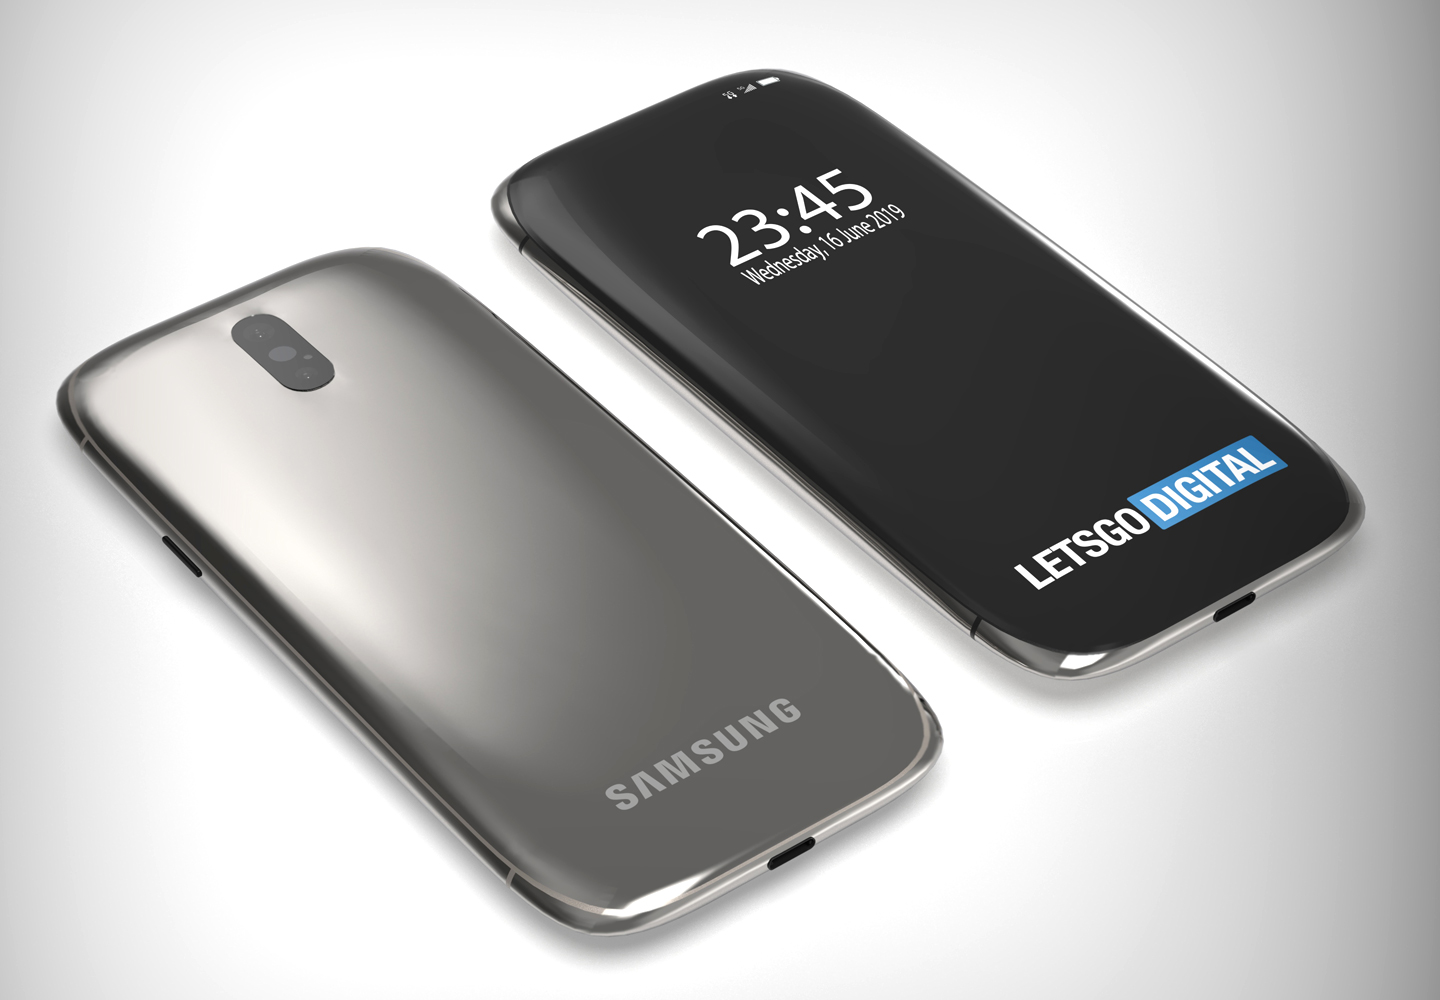 Samsung phone 3D curved screen